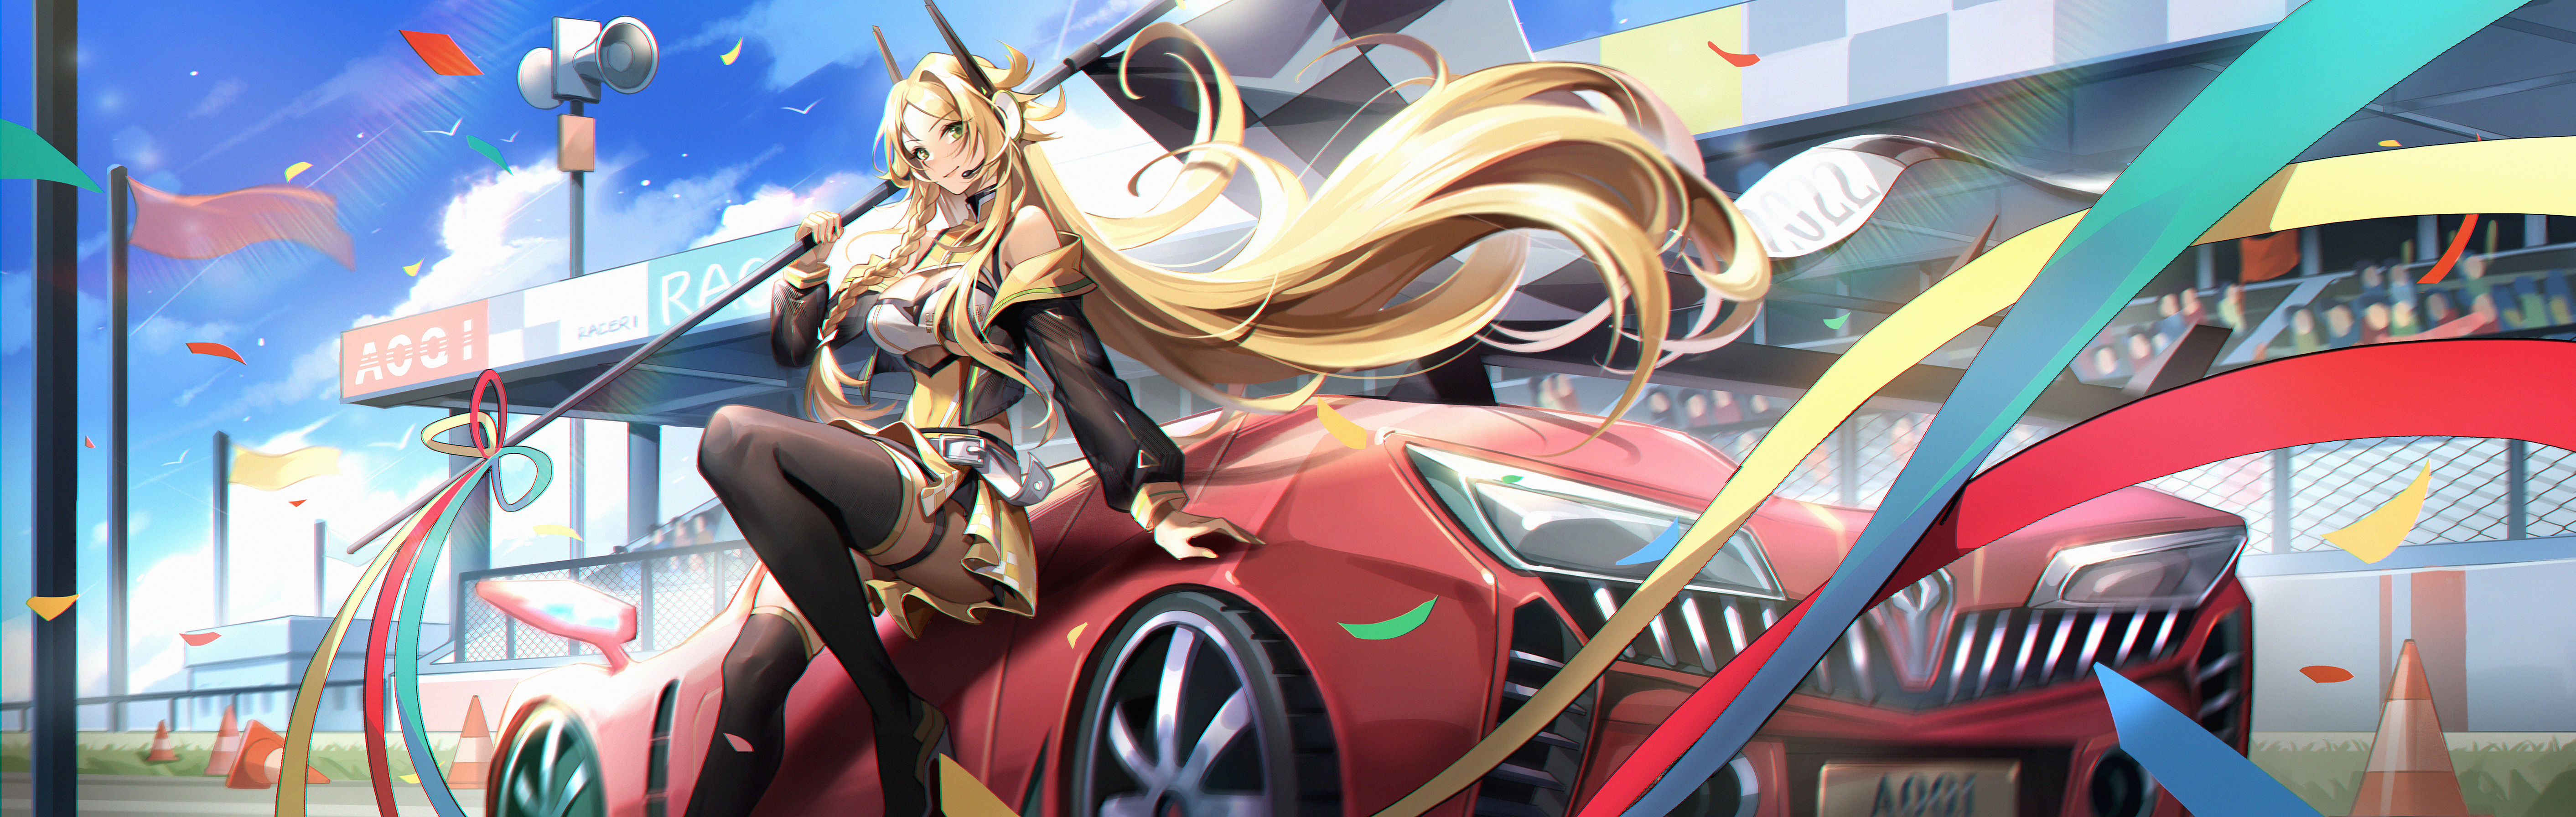 Anime 5649x1792 big boobs video game characters Race Queen Outfit anime girls car blonde race flag race cars ao qi chuan shuo